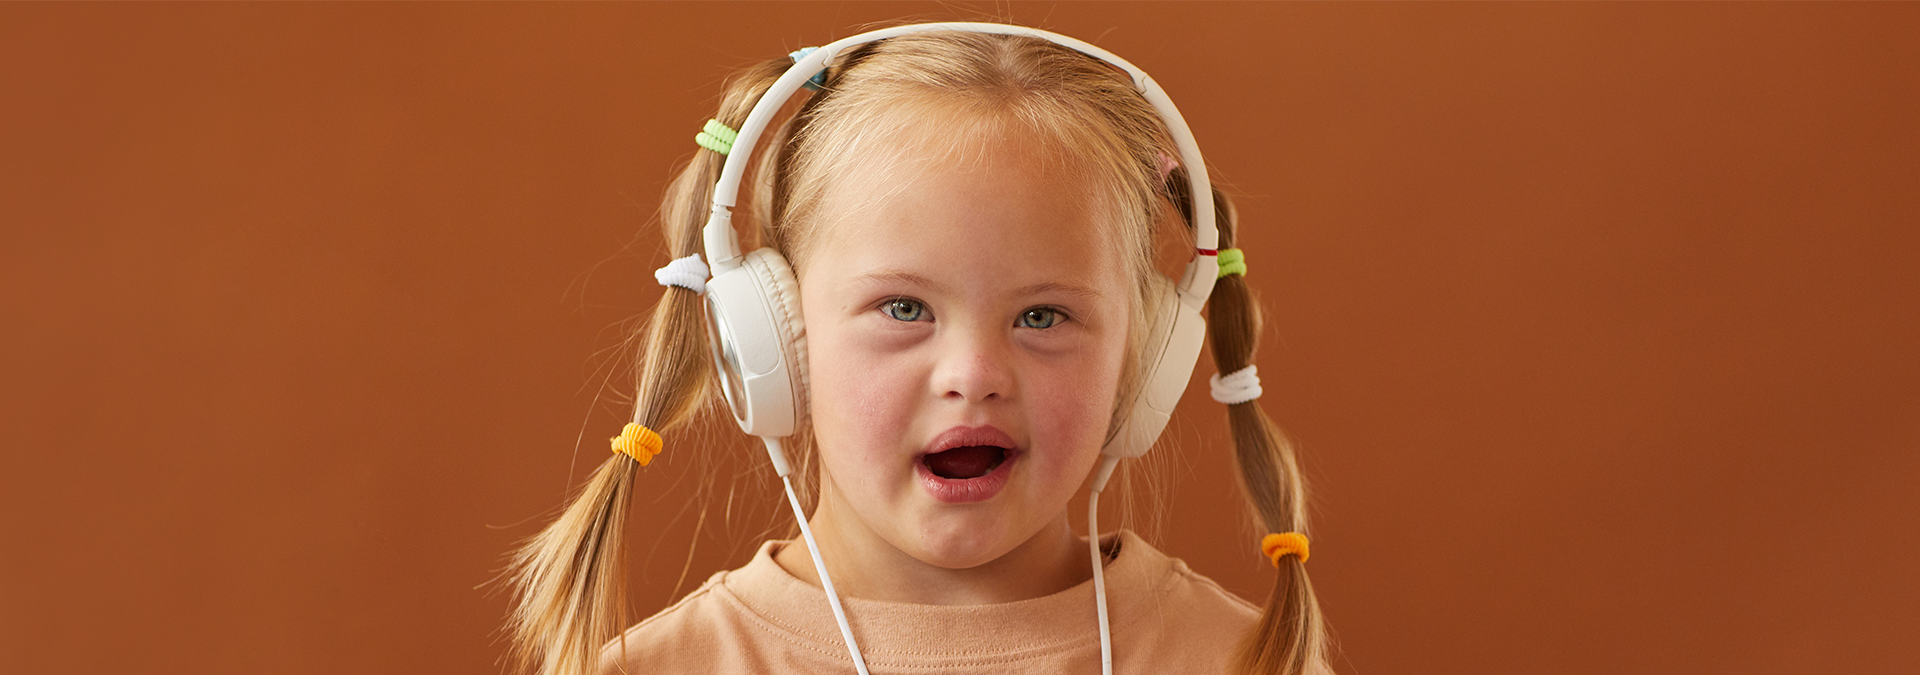 Girl with Down Syndrome listening with headphones